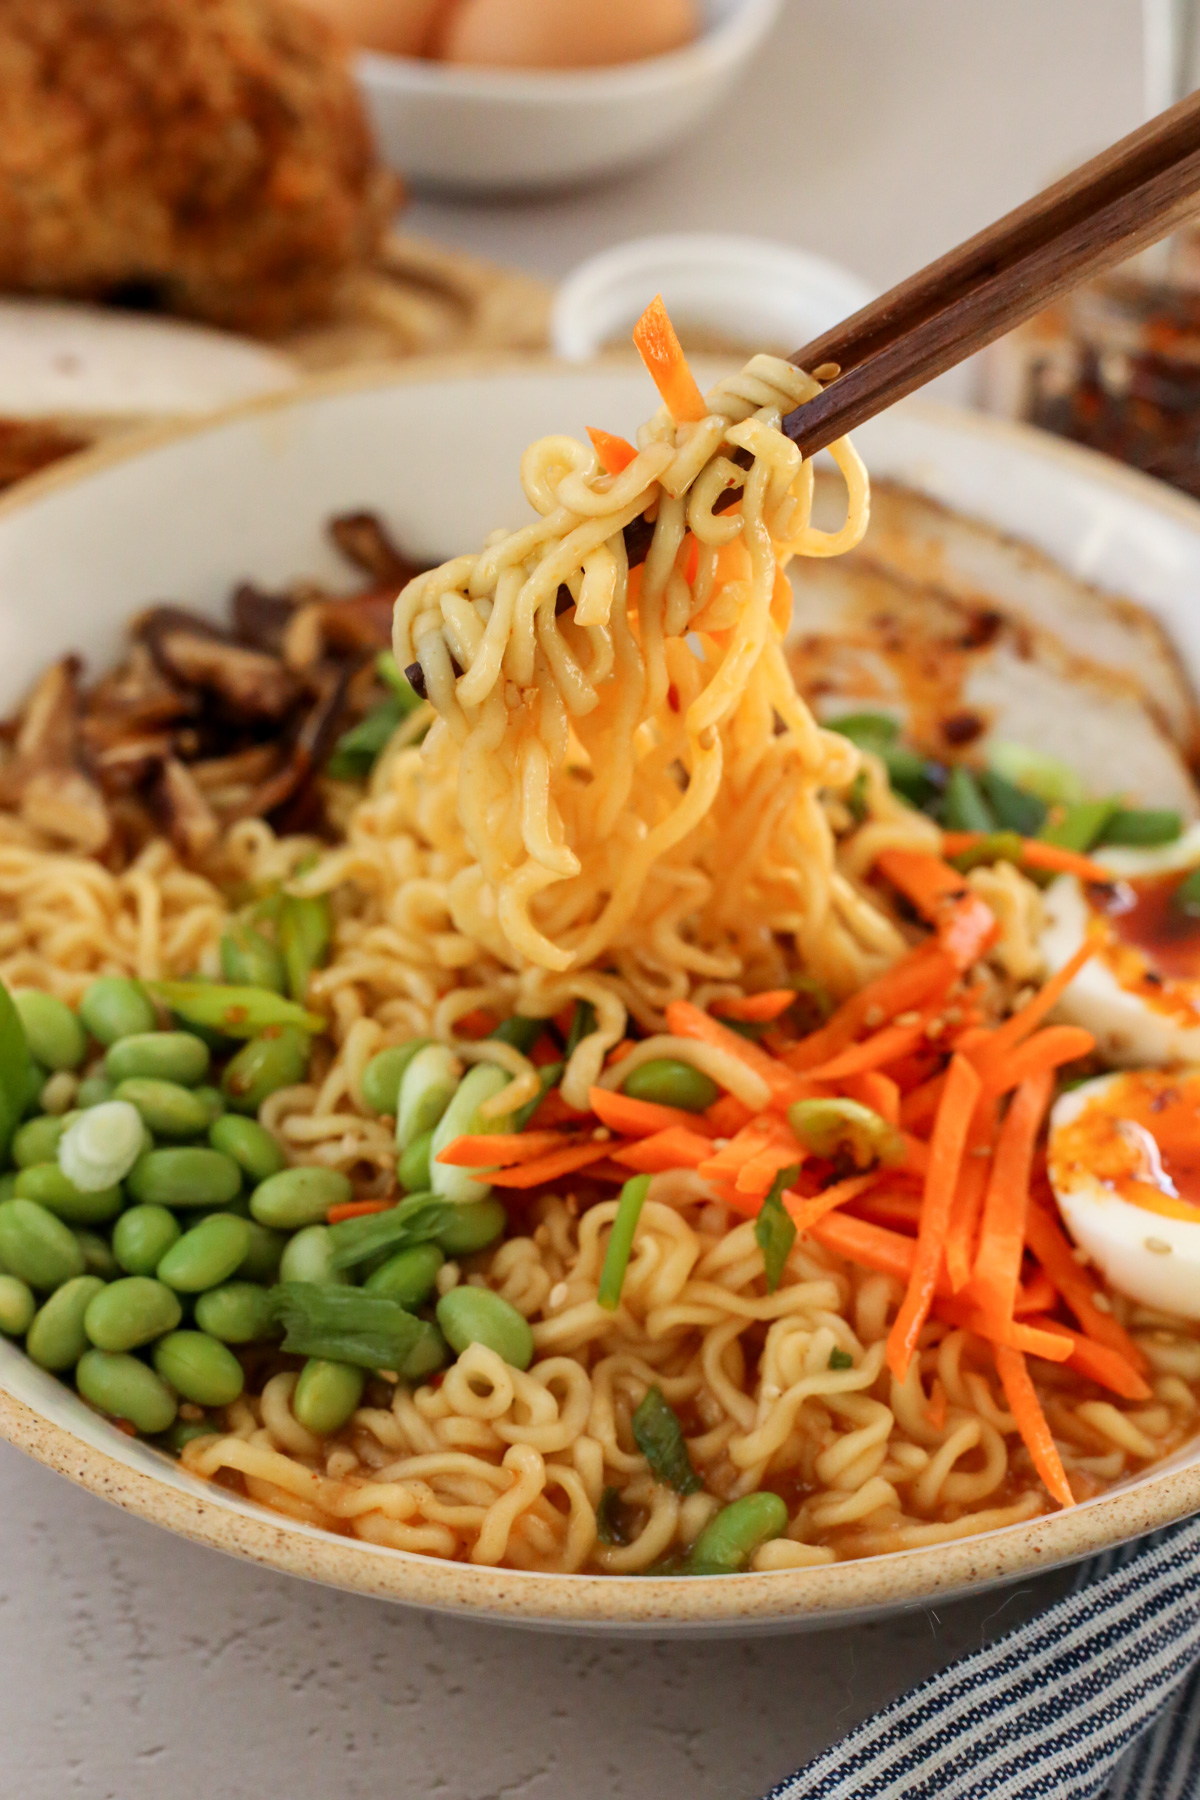 A pair of wooden chopsticks lifts a big bit of cooked ramen noodles out of a bowl filled with broth, with colorful vegetables mixed throughout